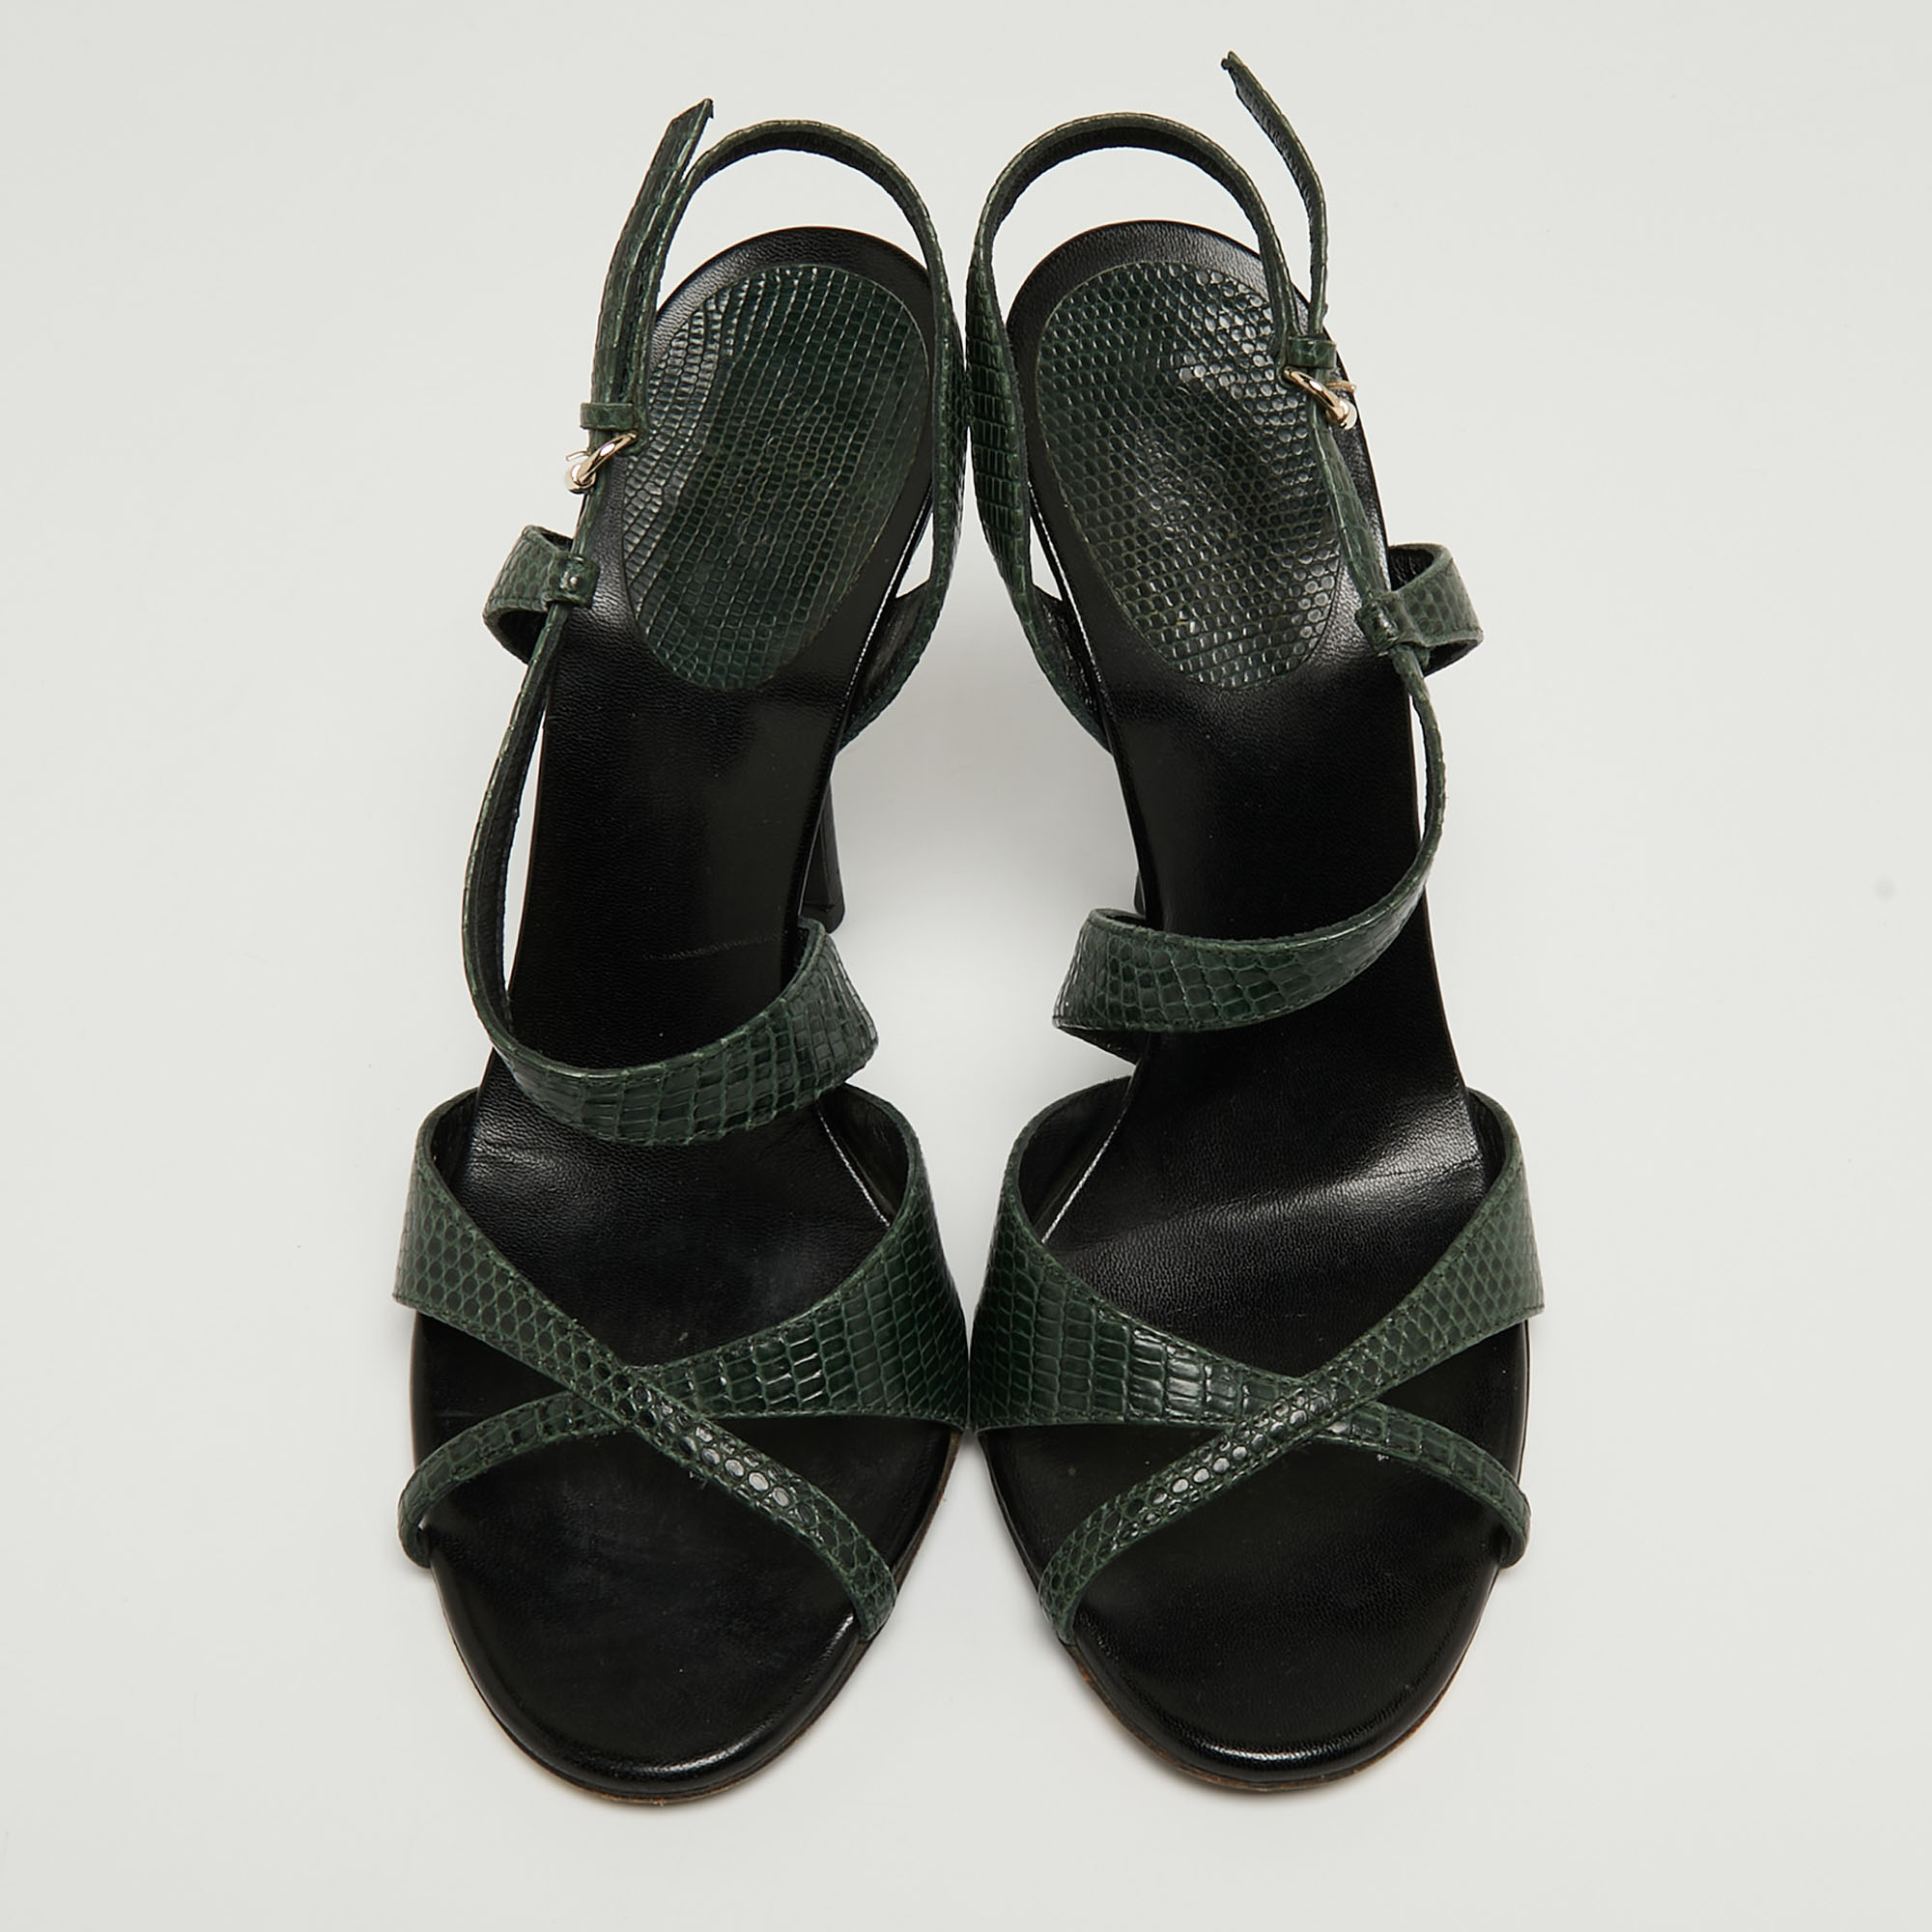 Gucci Green Lizard Strappy Slingback Sandals Size 38